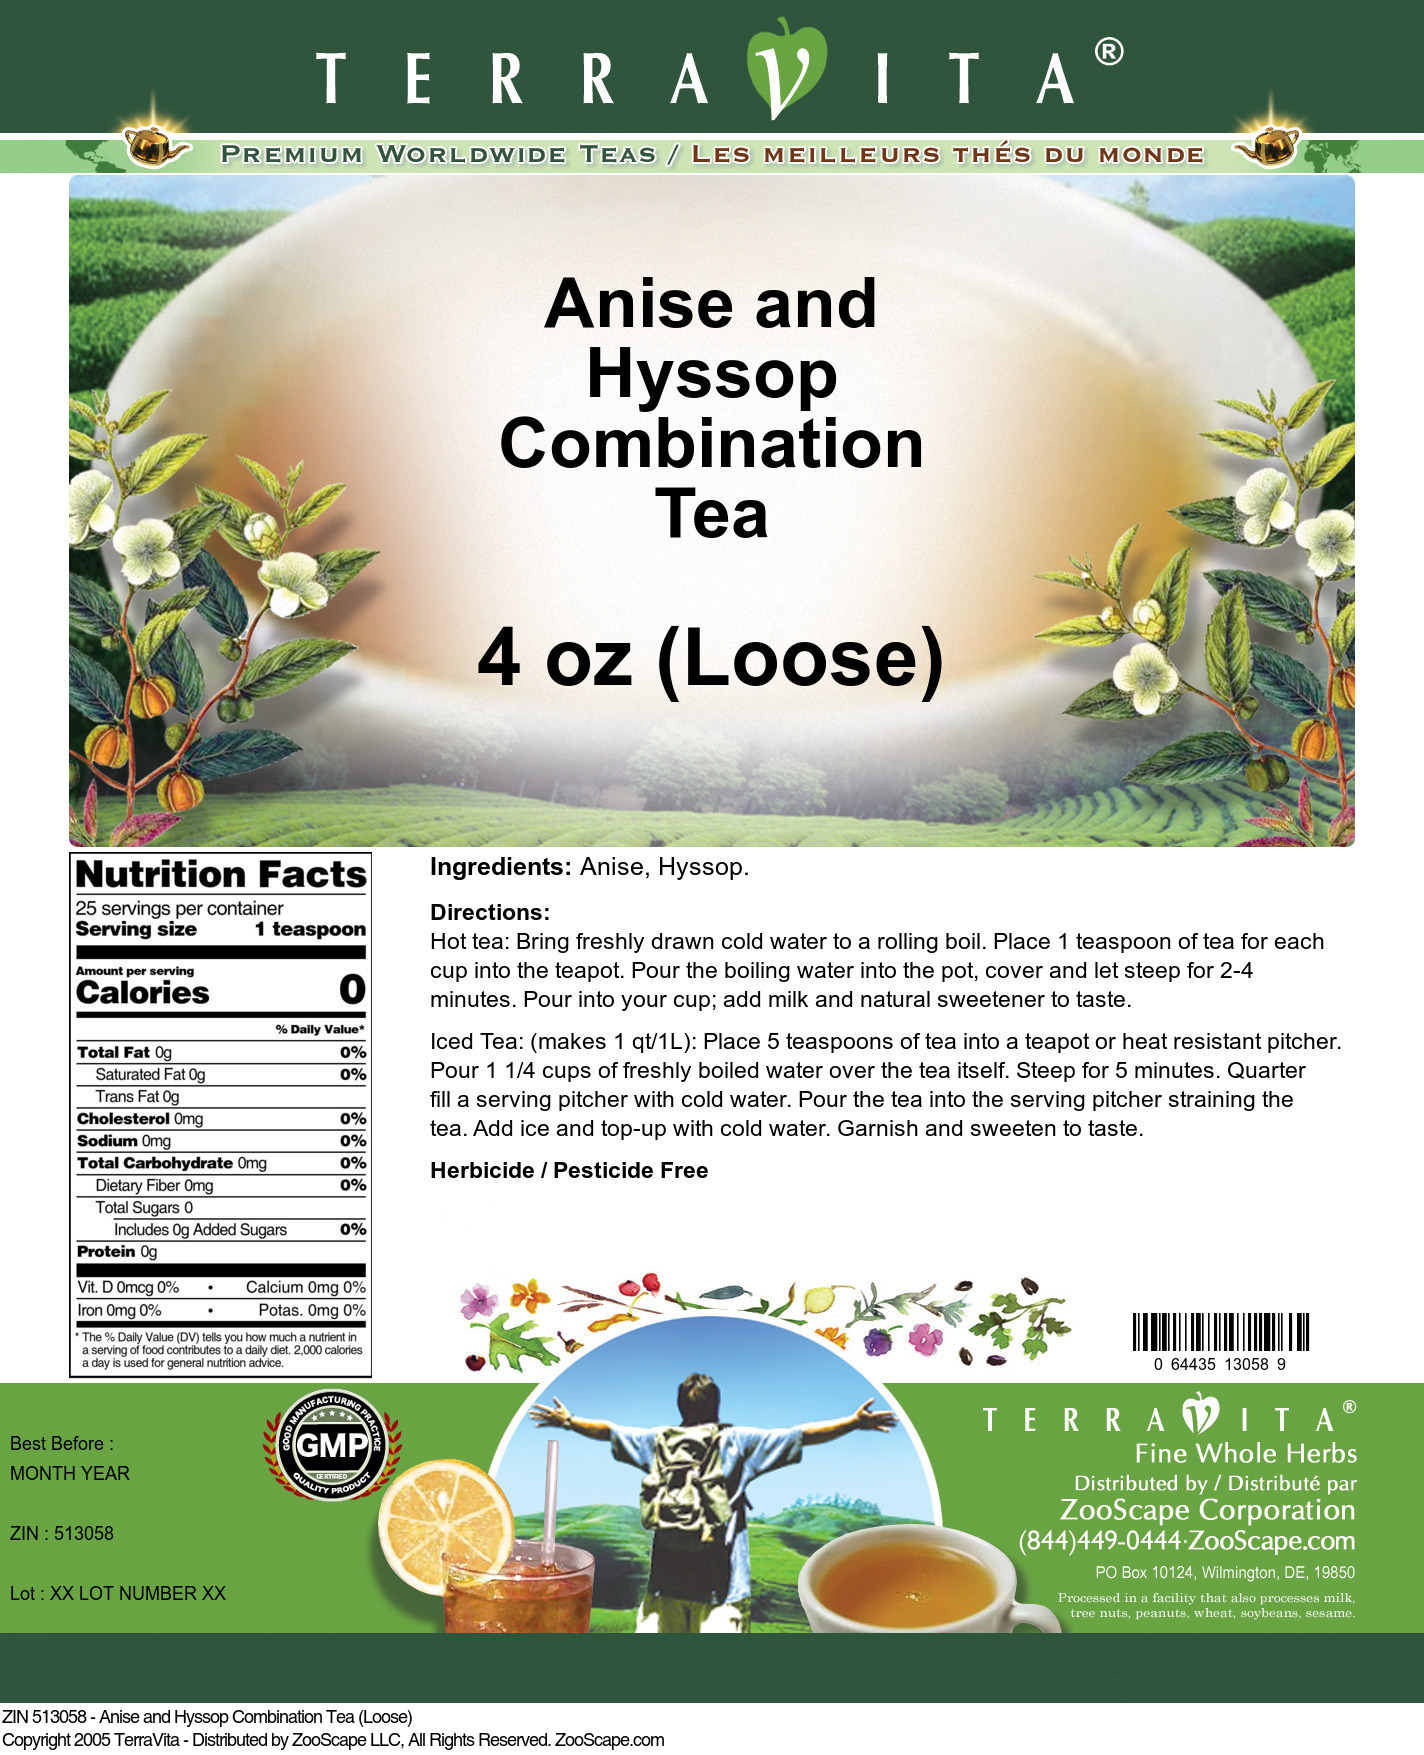 Anise and Hyssop Combination Tea (Loose) - Label